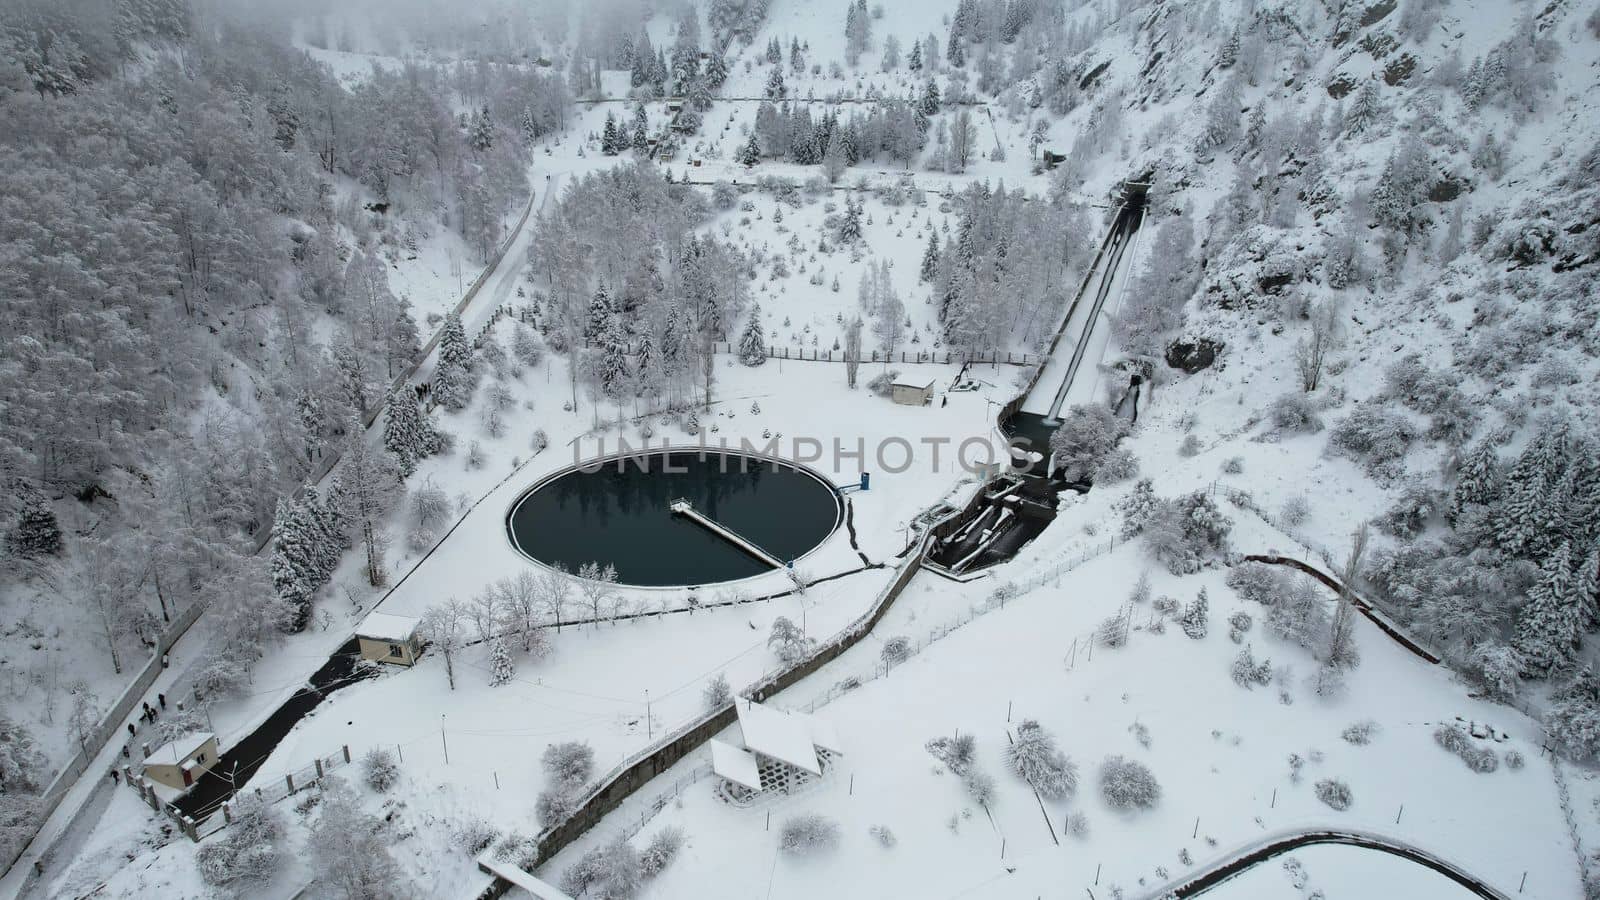 Snowy mountains with coniferous trees in Almaty. A reservoir for mountain water. Medeo Dam and the ladder of health. Everything is covered in clouds and snow. People and a cable car are visible